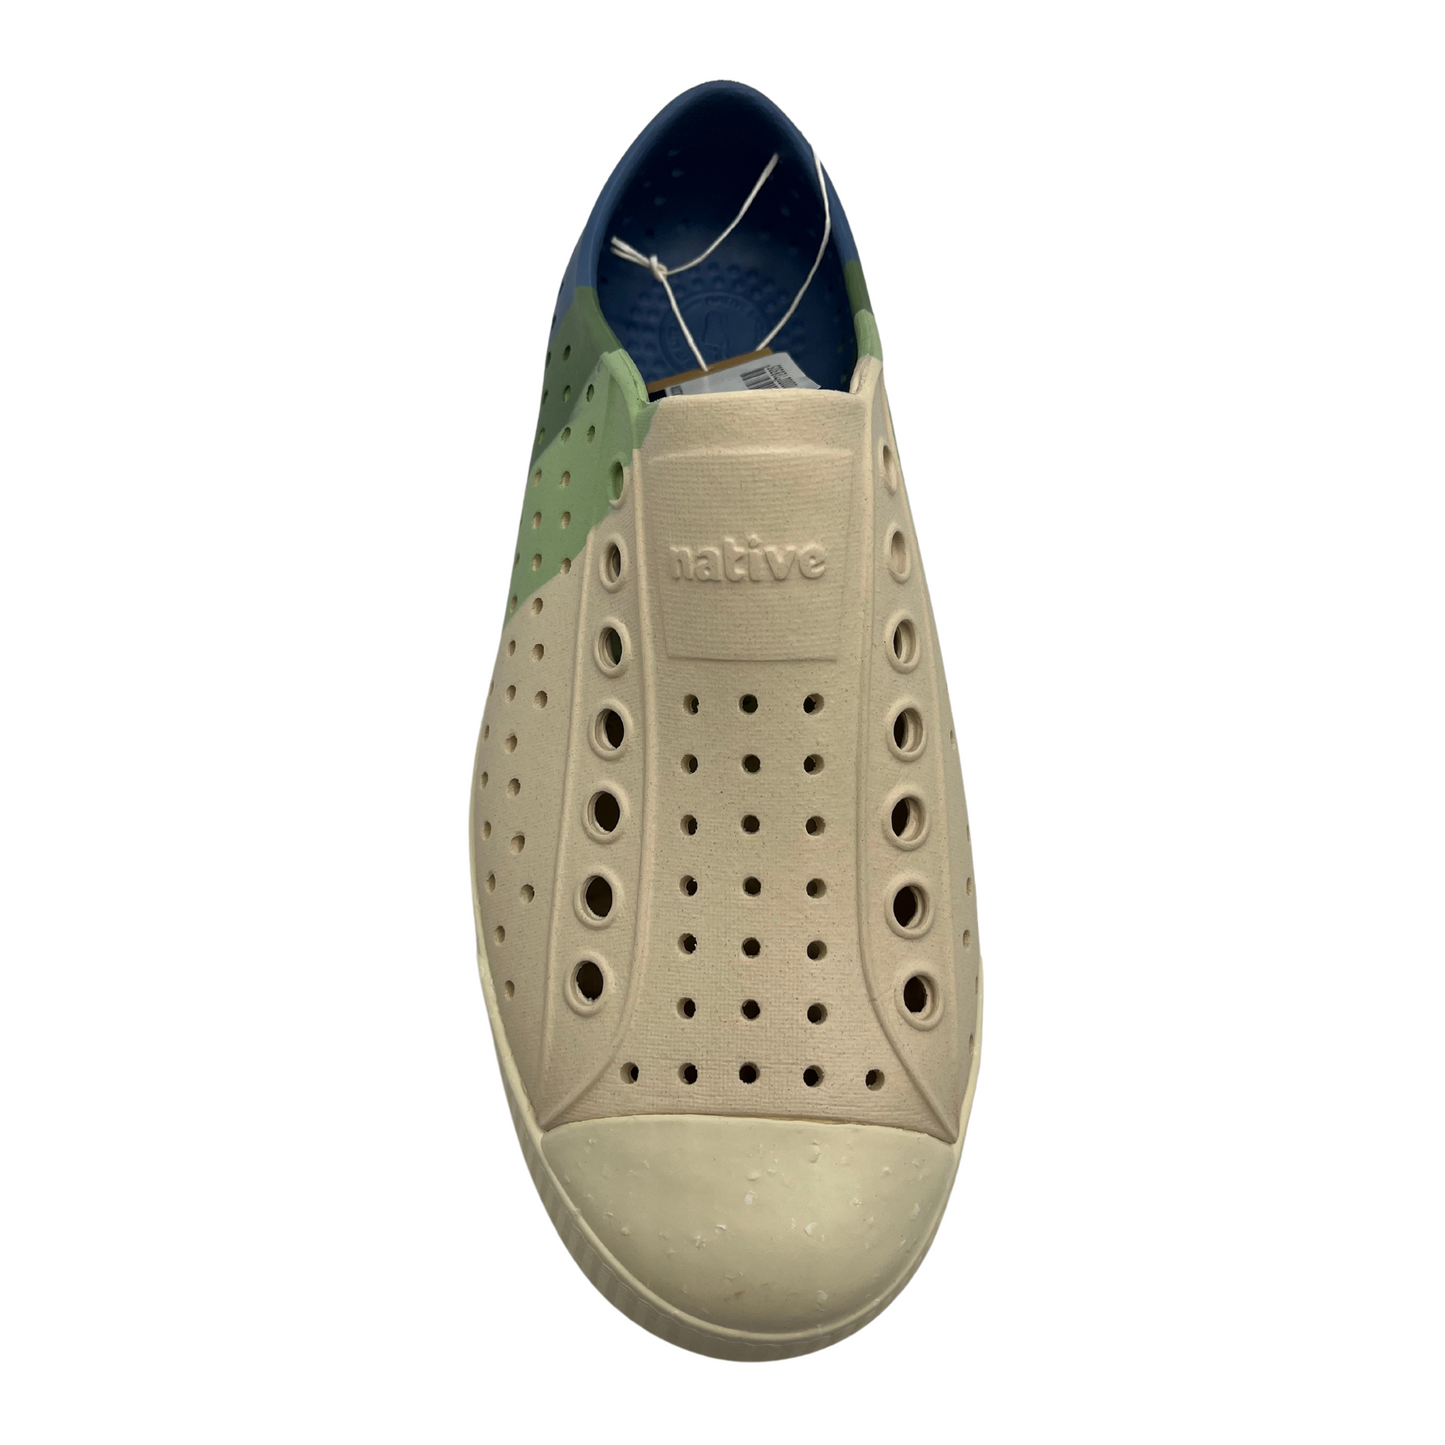 Top view of EVA perforated shoe with rounded toe